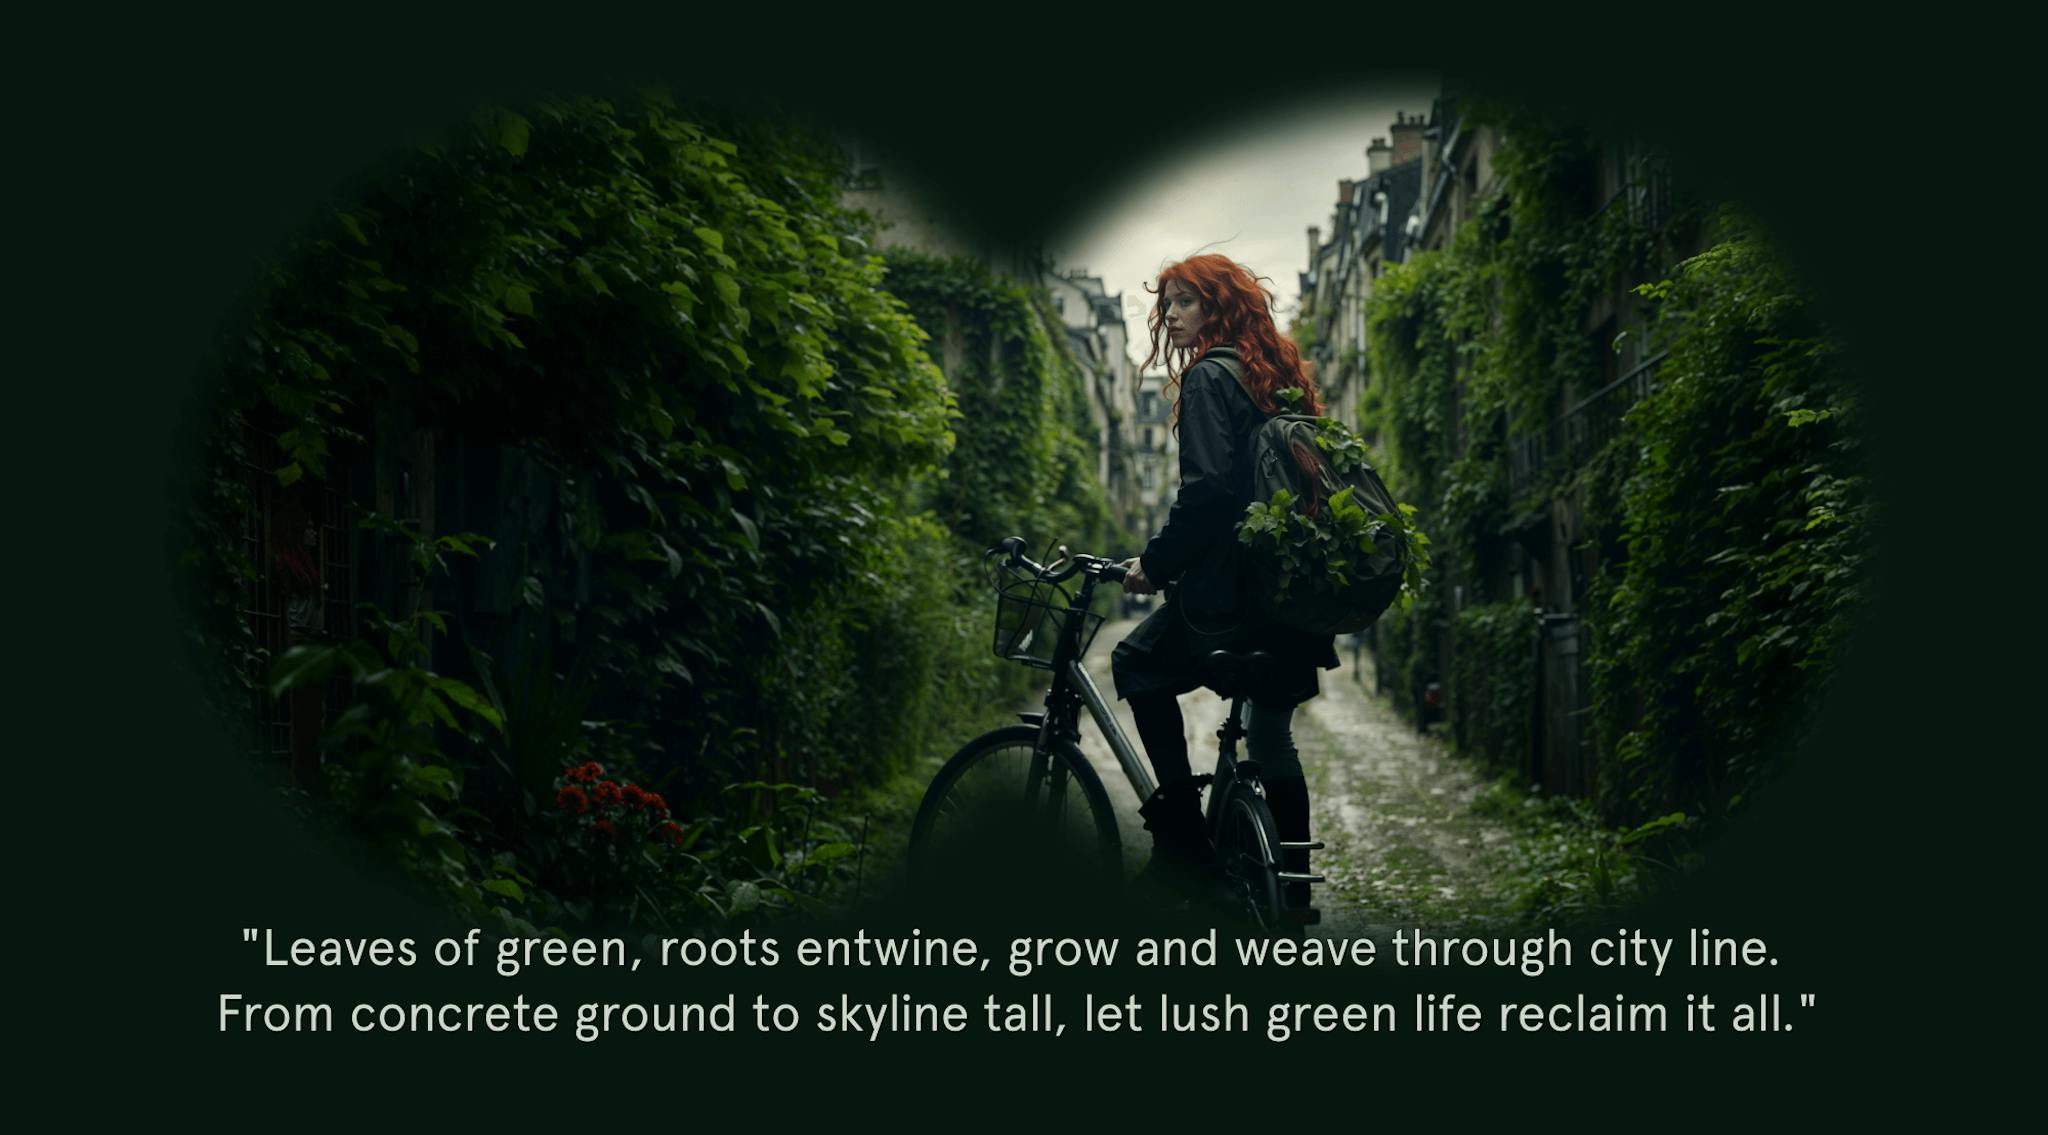 A person riding a bicycle on a cobblestone path, surrounded by lush greenery that engulfs the buildings, viewed through a binocular vignette with a quote: "Leaves of green, roots entwine, grow and weave through city line. From concrete ground to skyline tall, let lush green life reclaim it all."